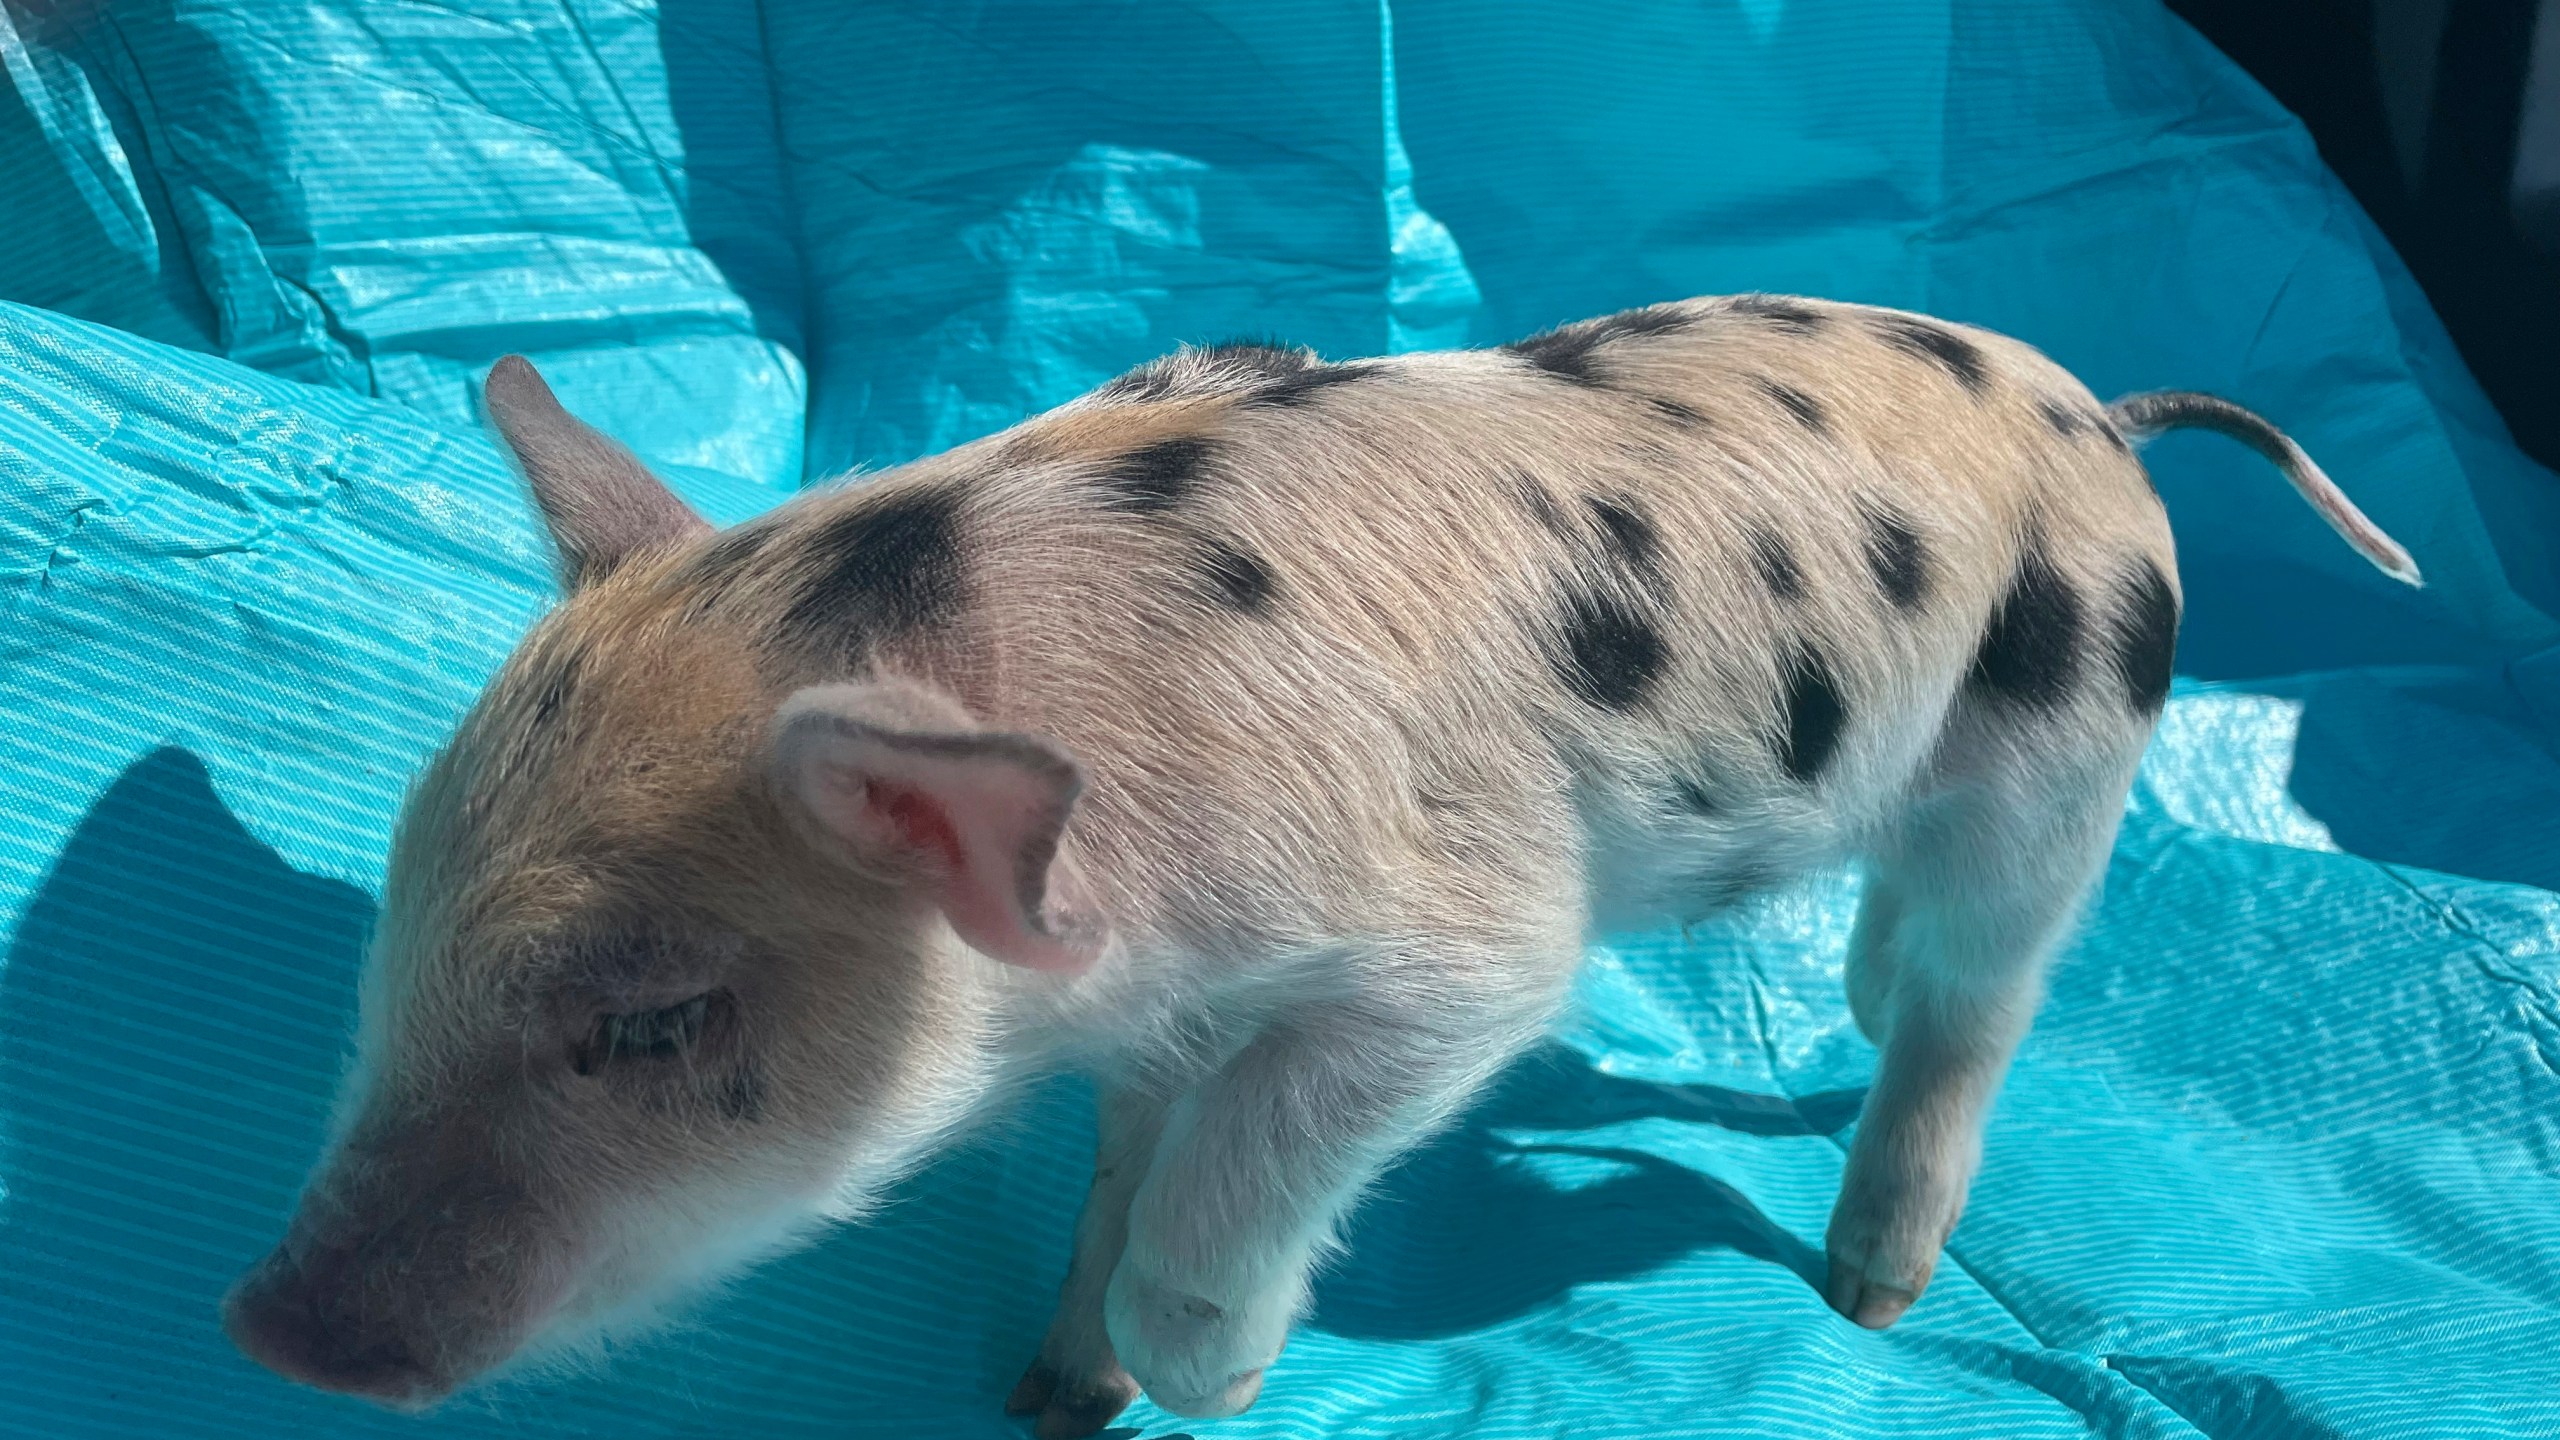 This photo provided by the St. Paul Saints shows a pig named Ozempig on Thursday, March 28, at a farm in Wisconsin. Some people have criticized the Minnesota team's decision to name the pig after the weight loss drug Ozempic, saying the play on words belittles people who are overweight. (St. Paul Saints Baseball via AP)